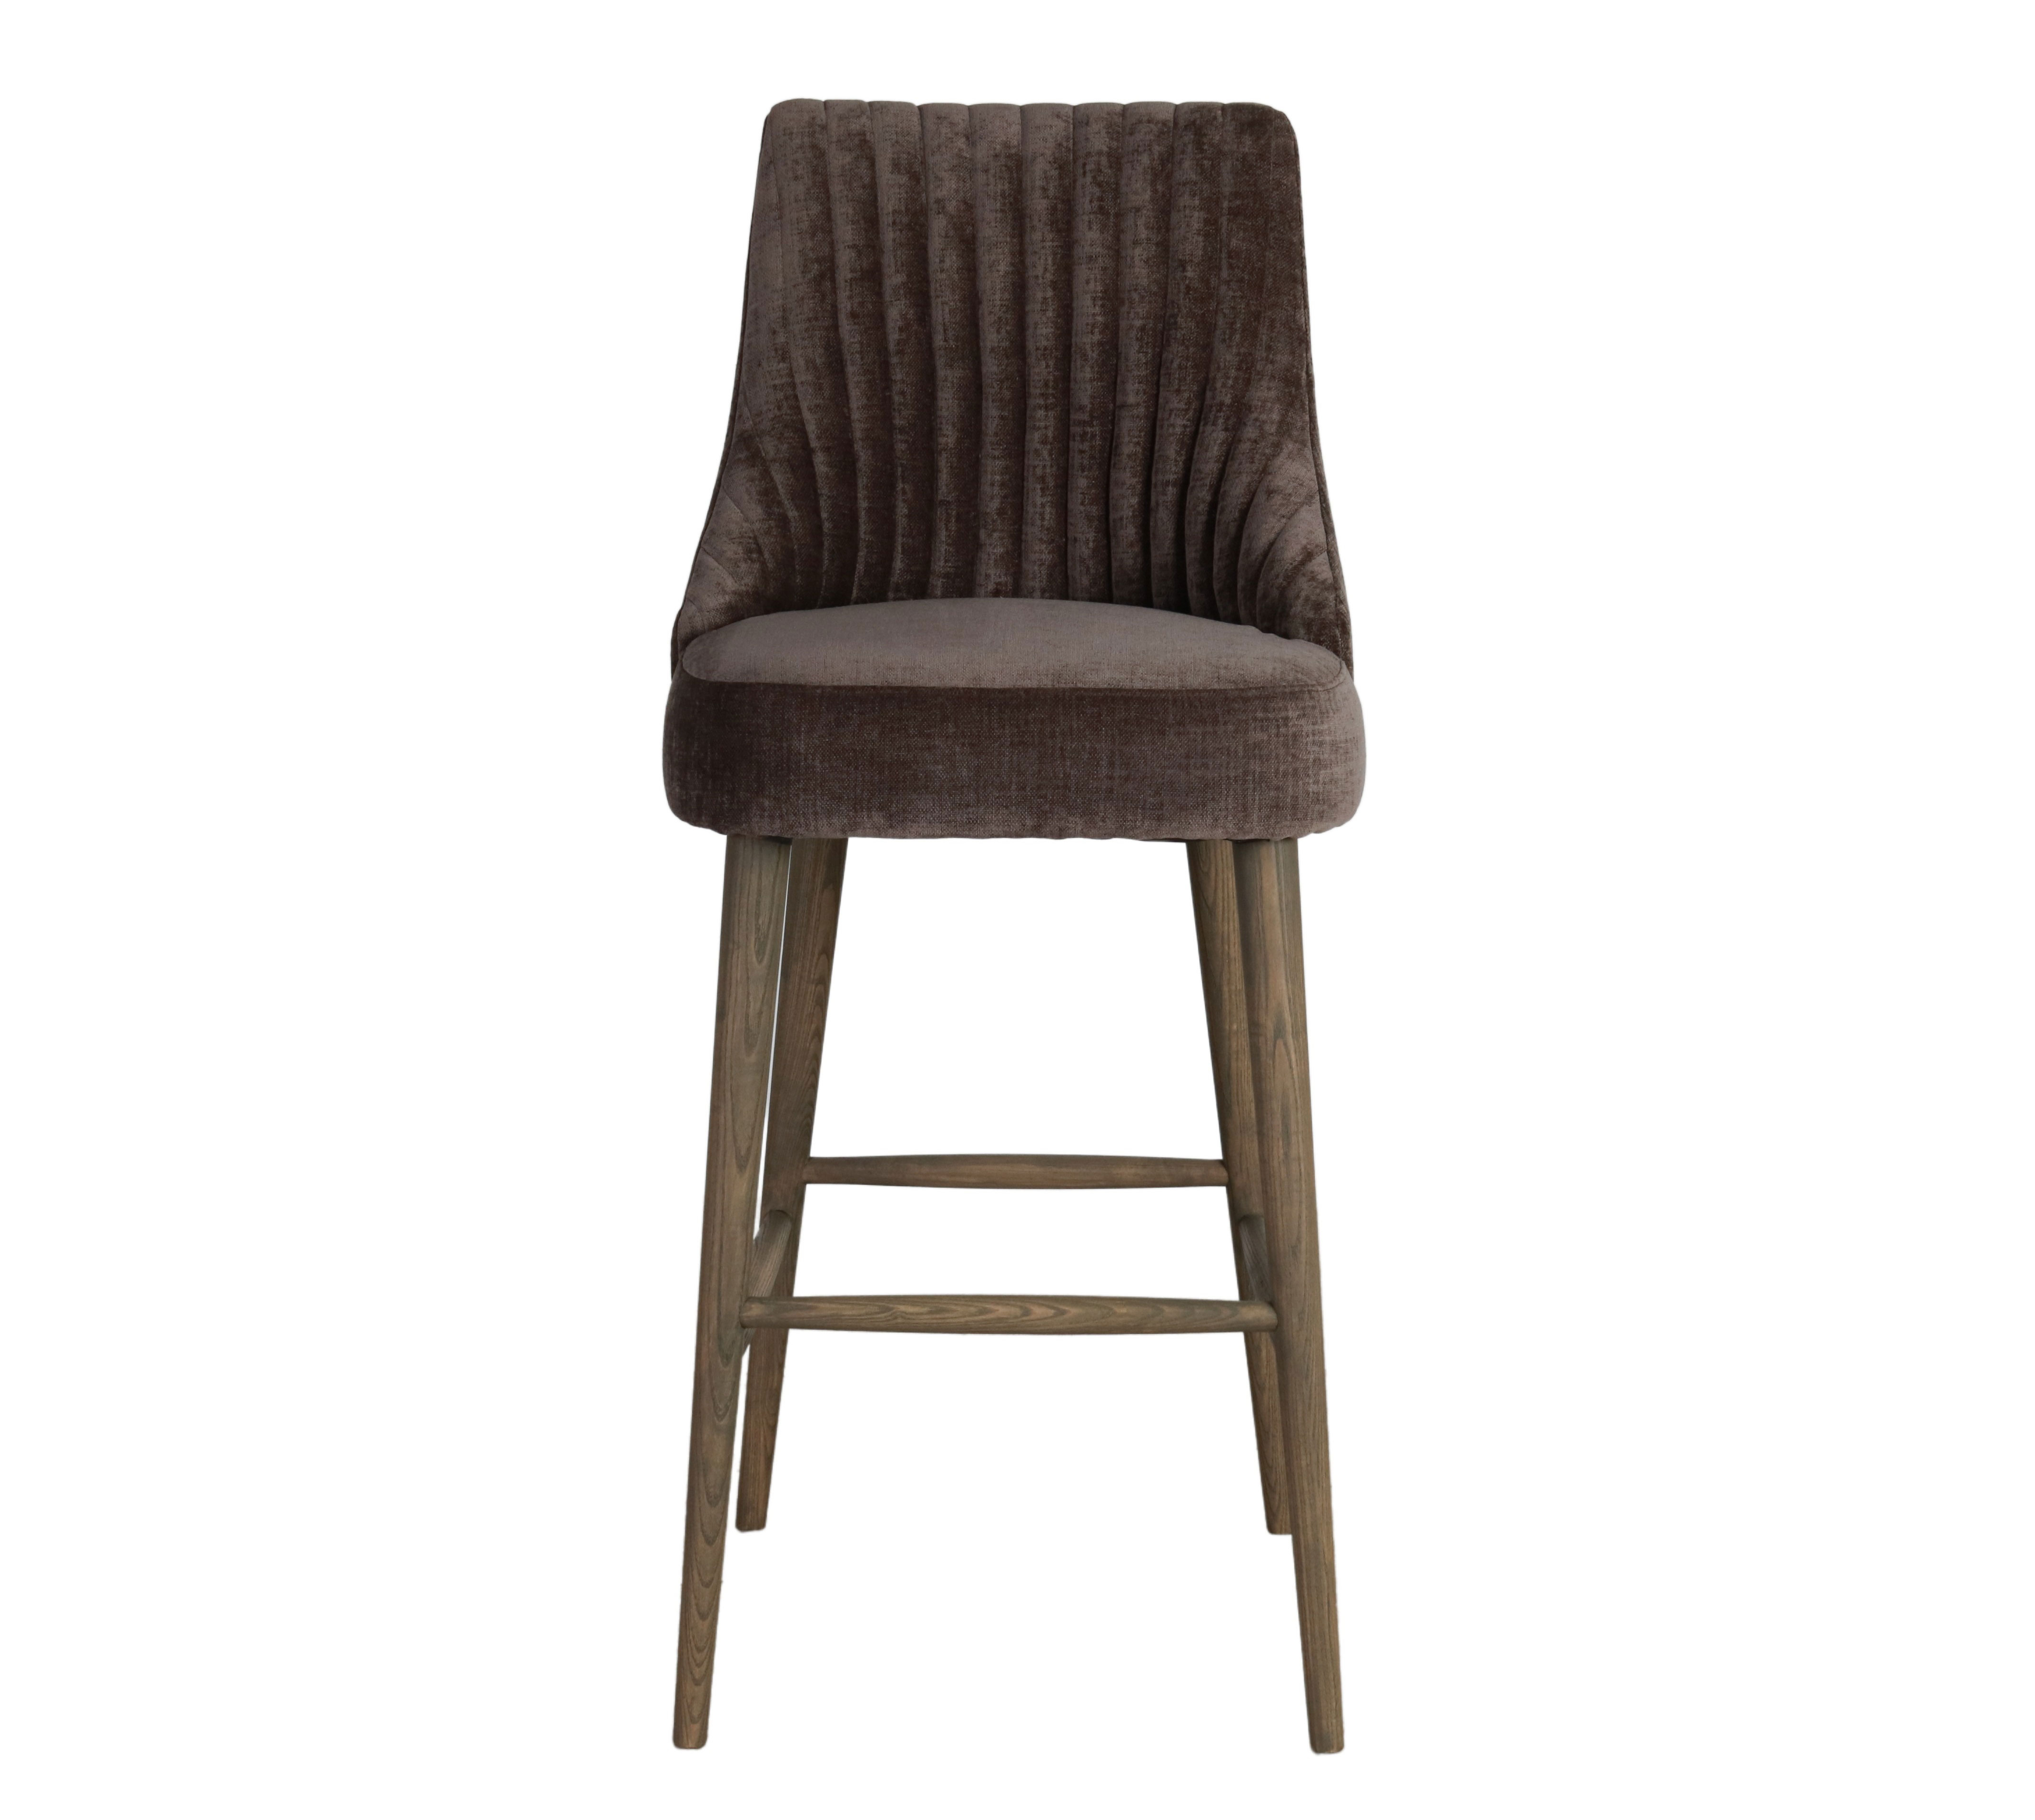 brown upholstered bar chair with oak legs